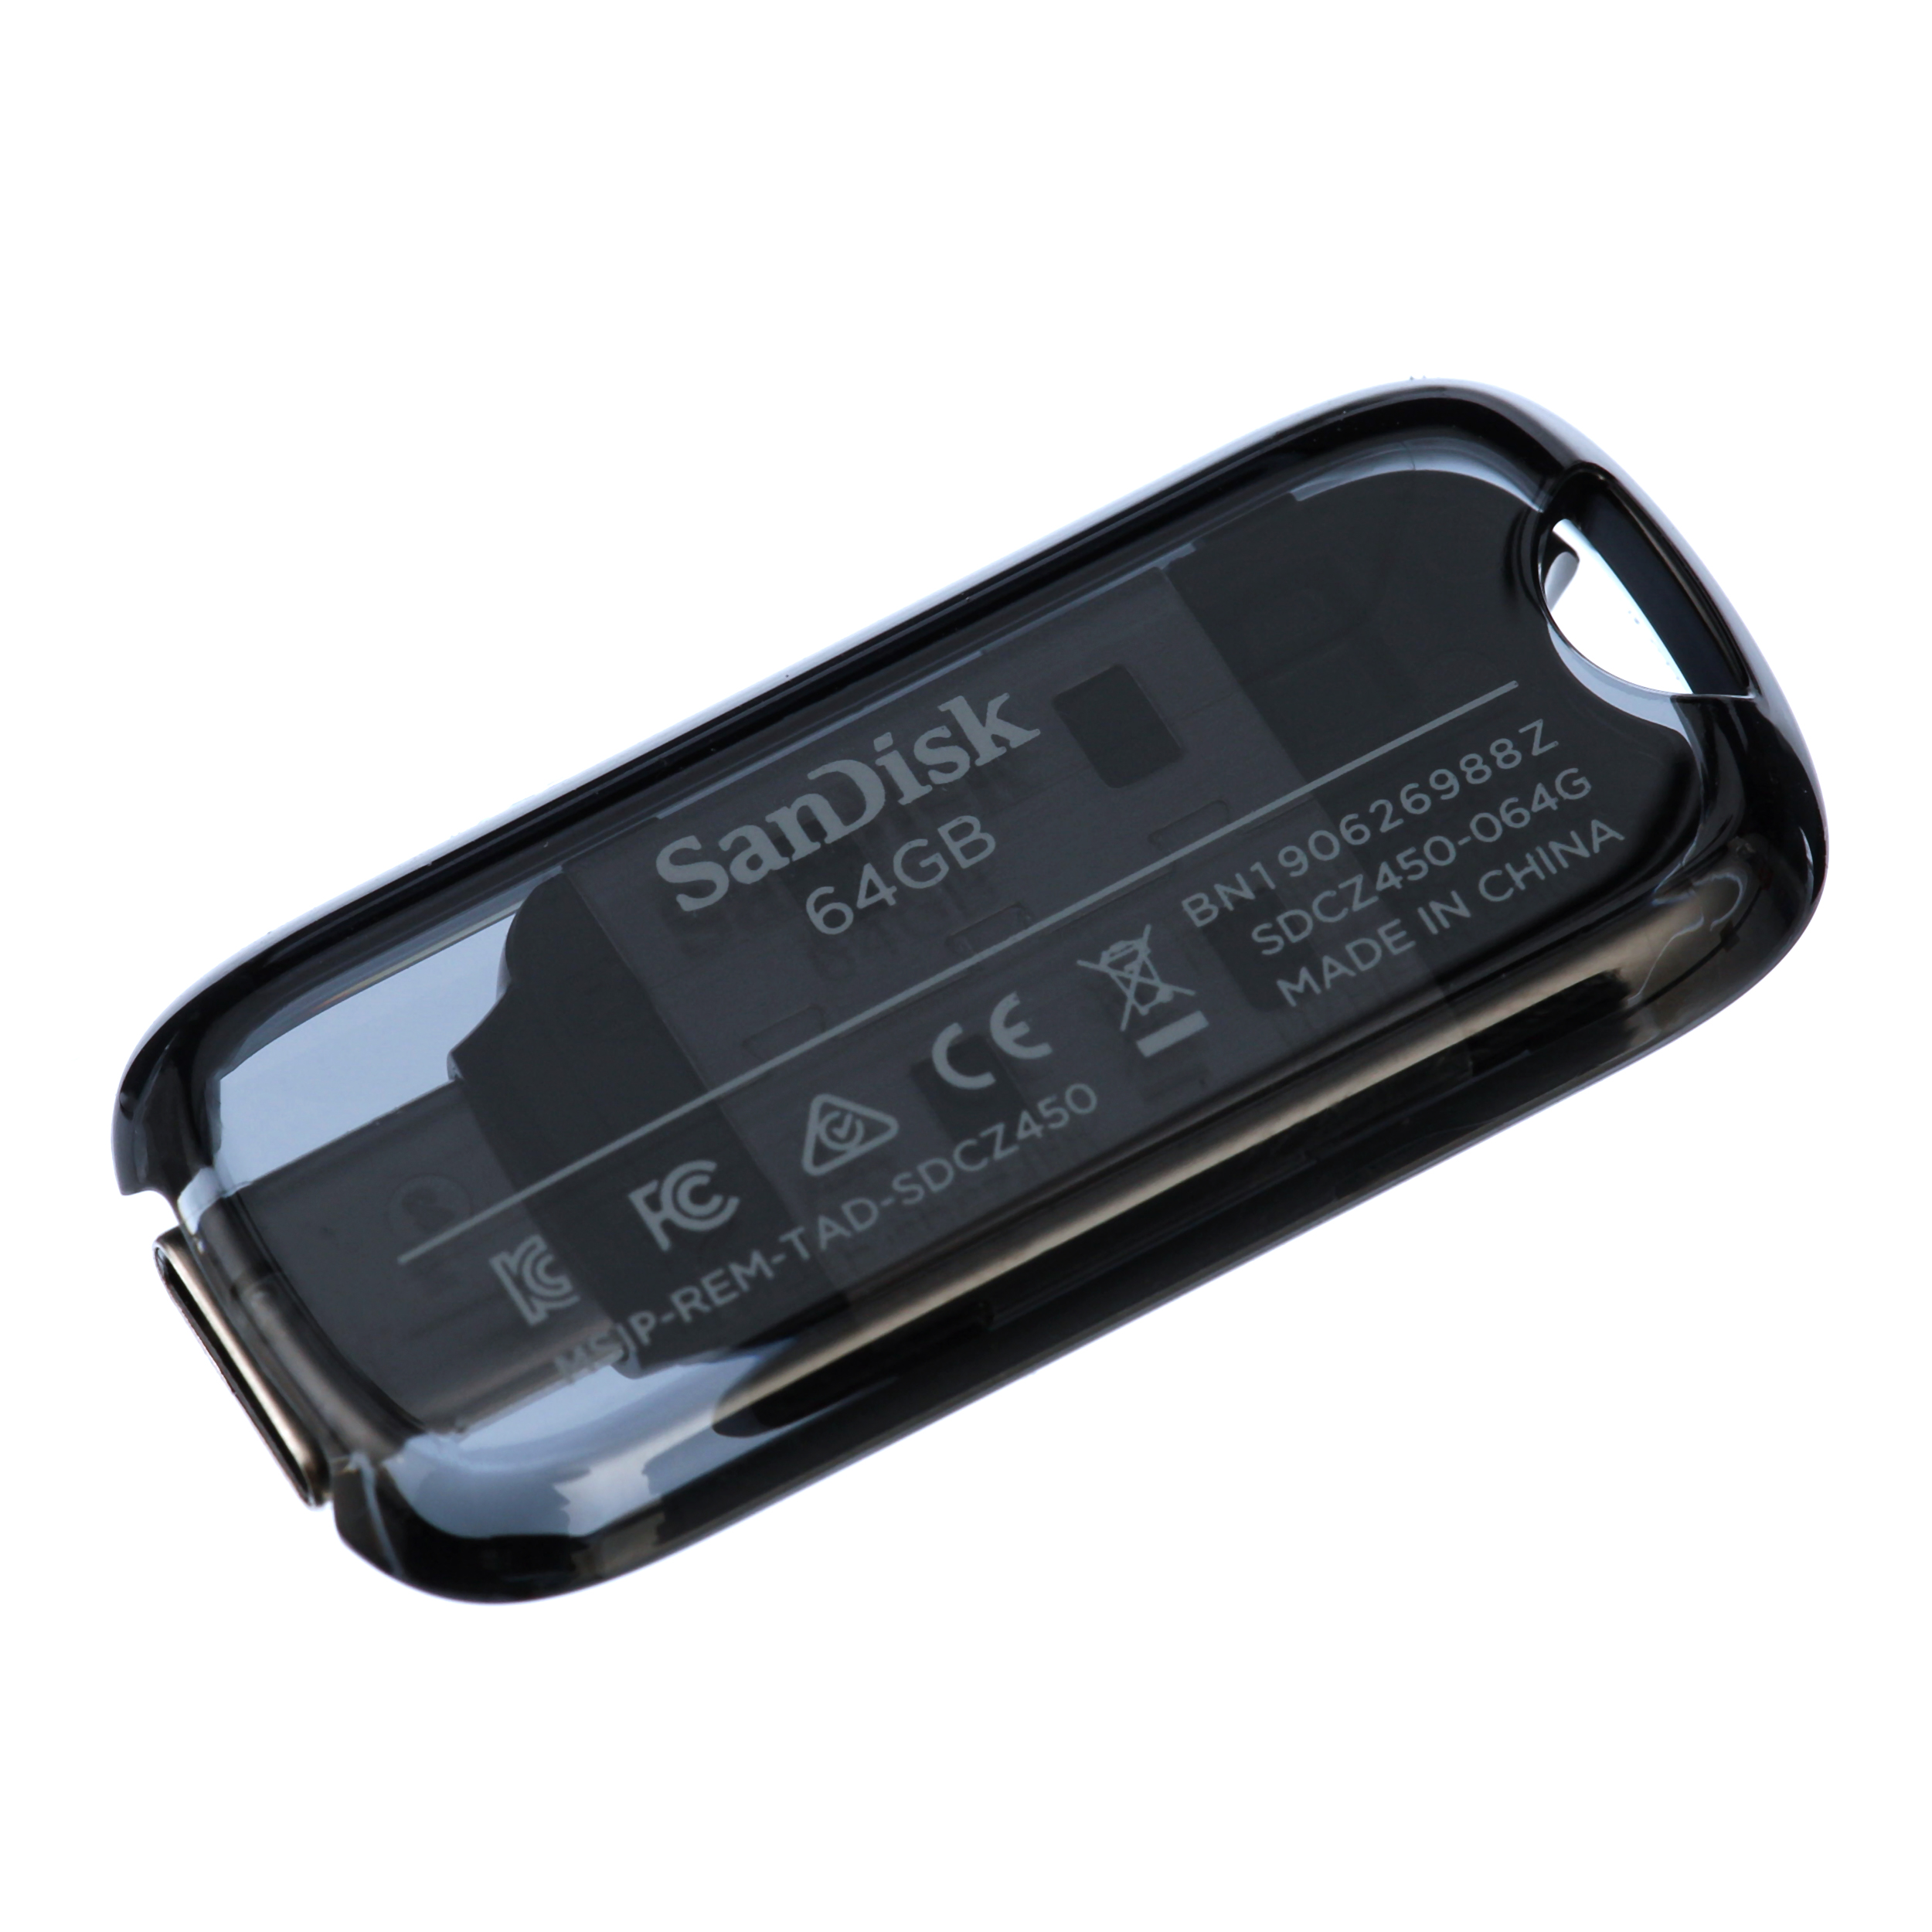 SanDisk Ultra USB Type-C 64GB Flash Drive (SDCZ450-064G-G46) - image 4 of 5